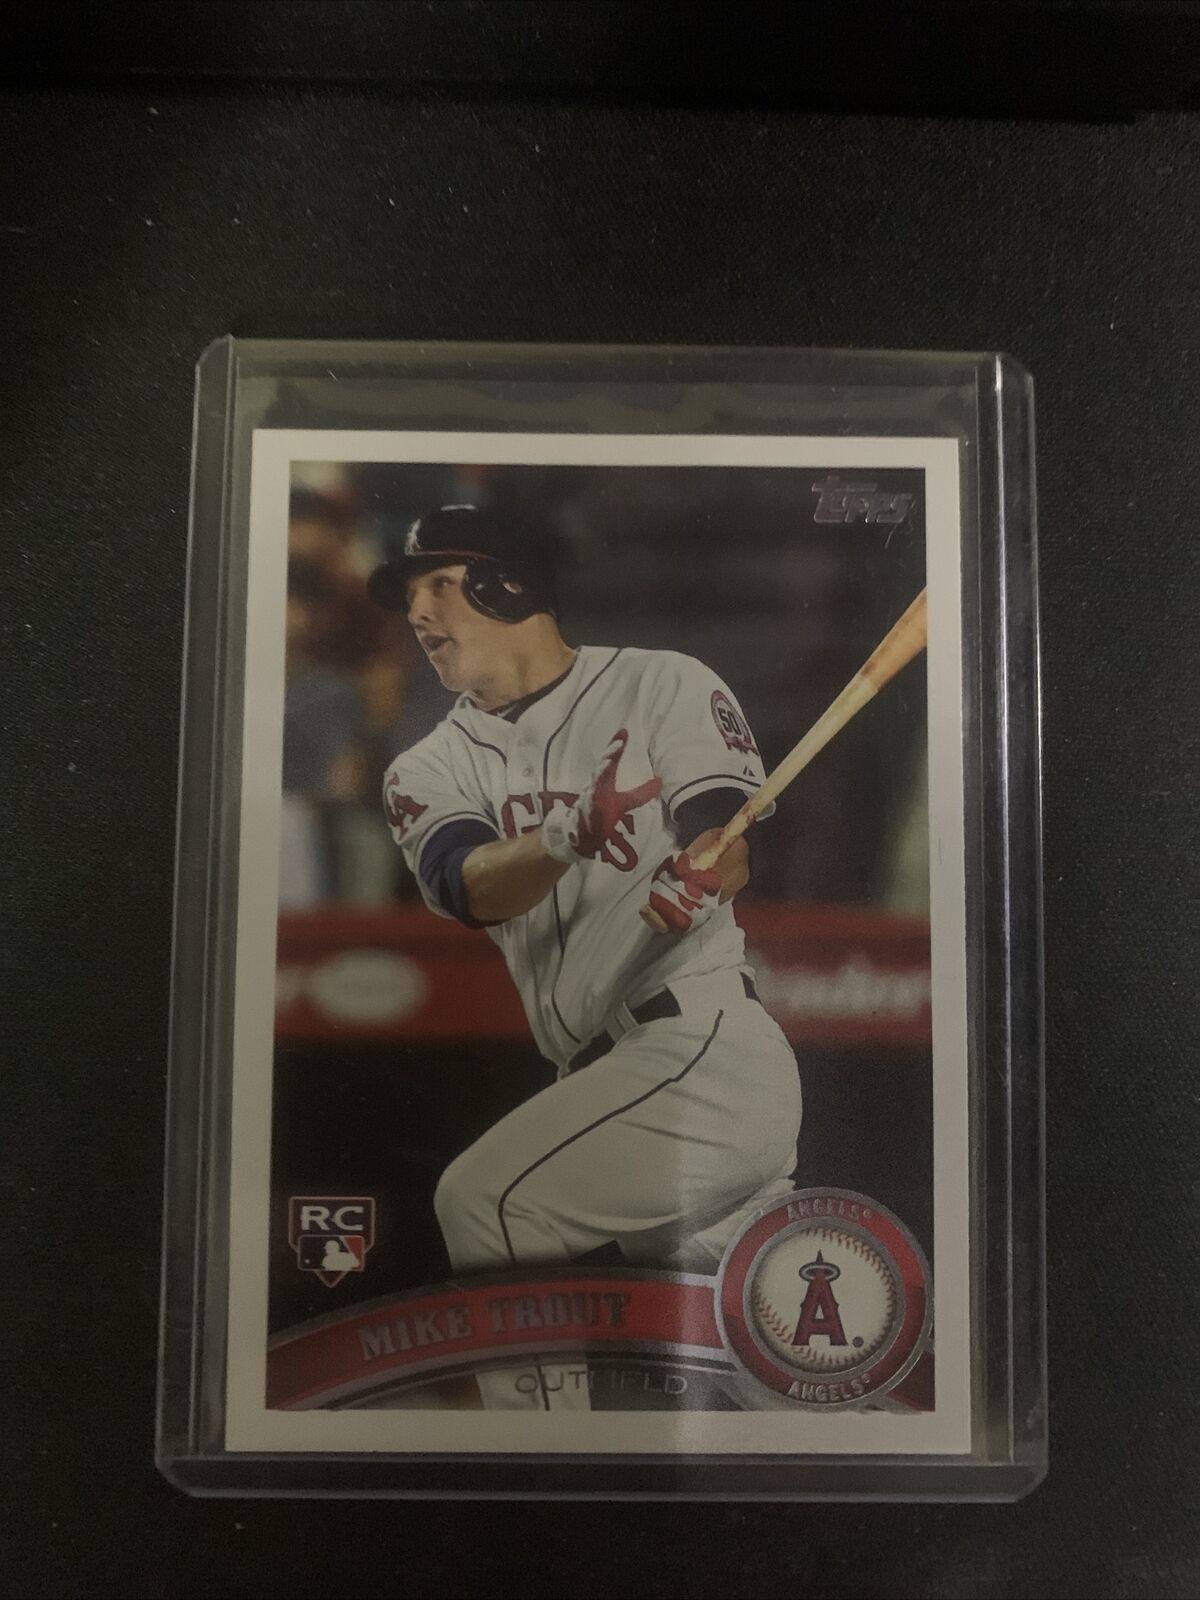 Mike Trout 2011 Topps Update Rookie Card